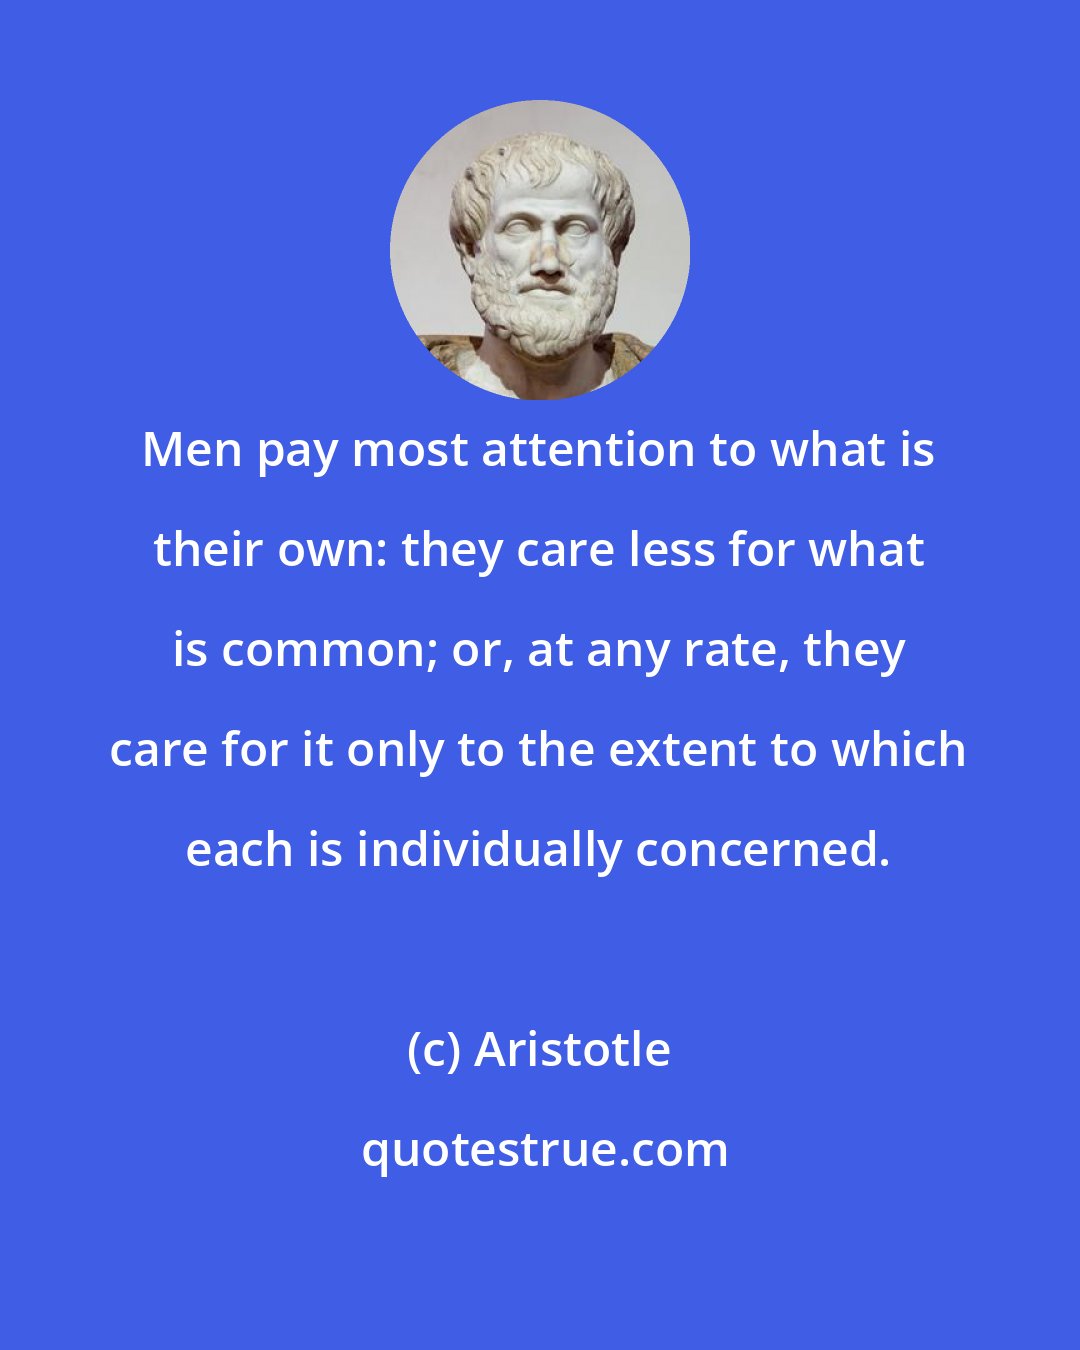 Aristotle: Men pay most attention to what is their own: they care less for what is common; or, at any rate, they care for it only to the extent to which each is individually concerned.